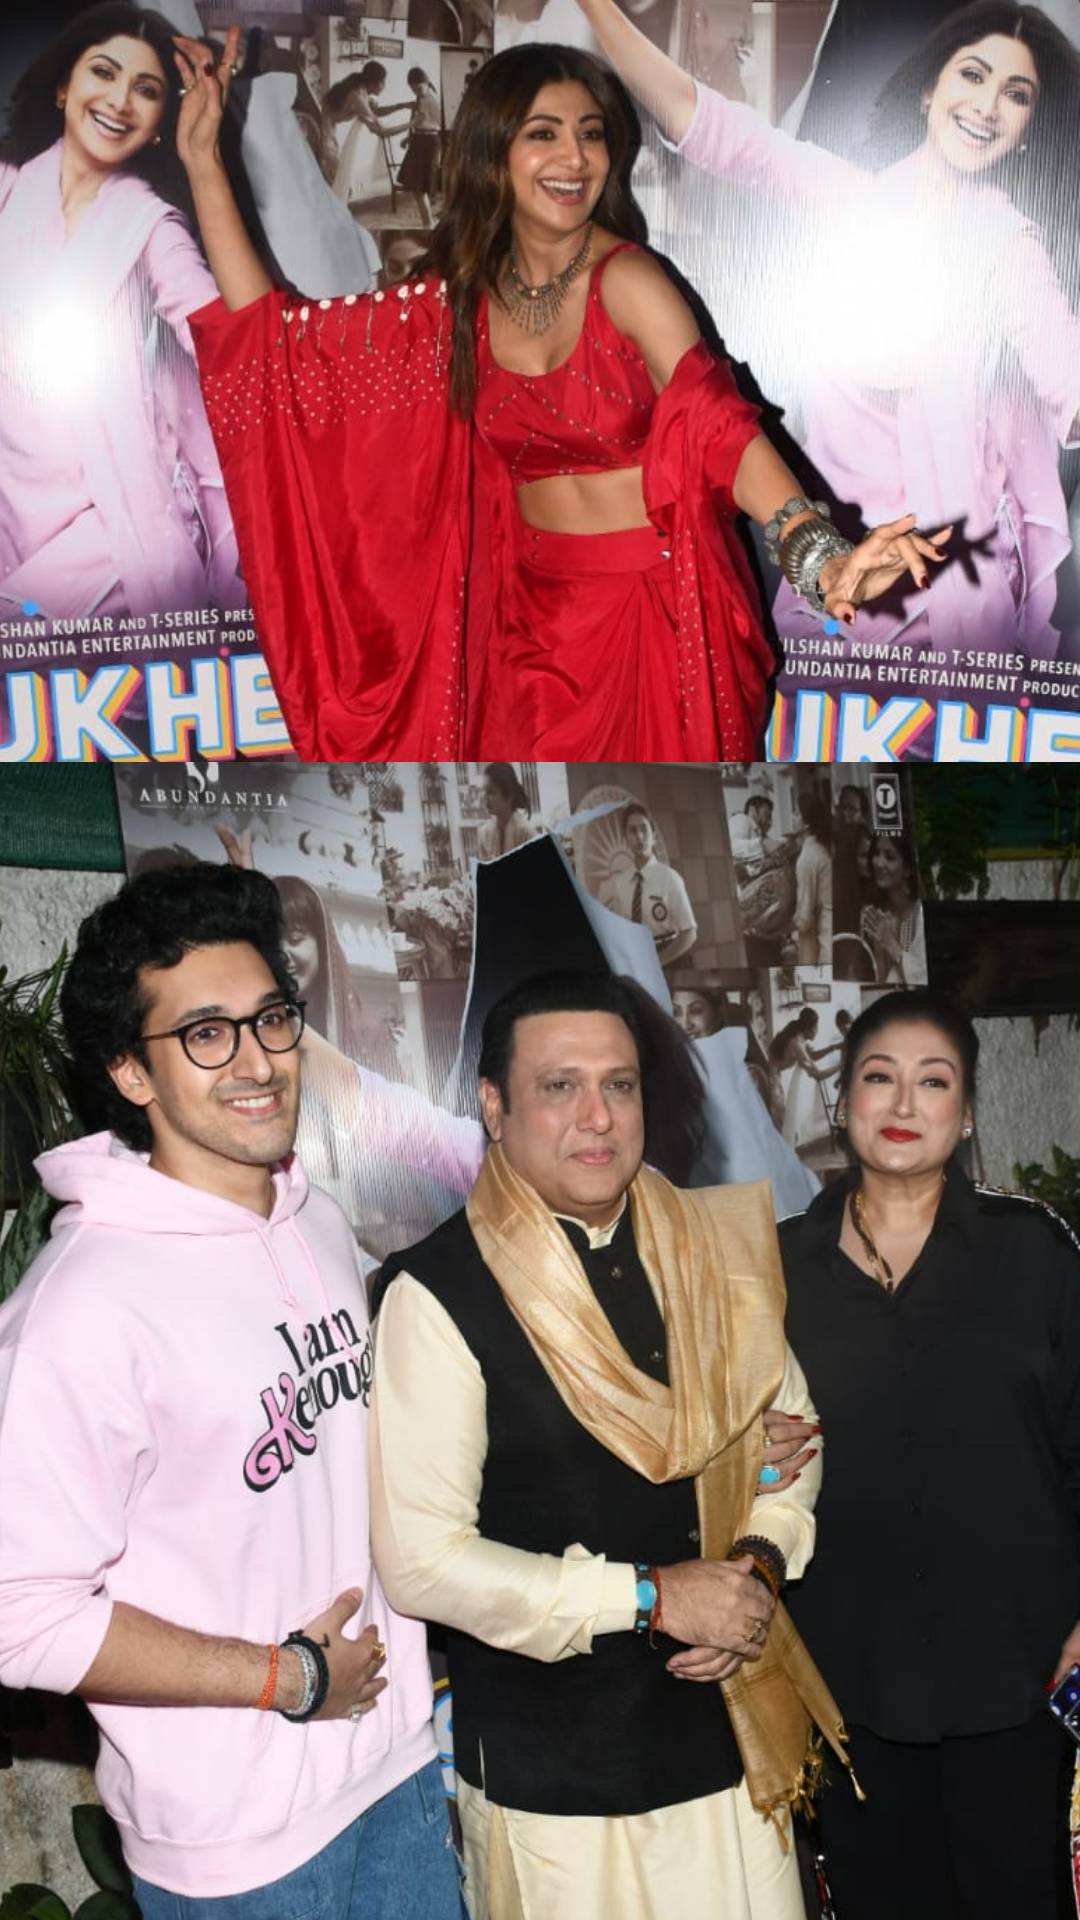 A star-studded crowd gathered at the screening of 'Sikhi', including Elush Yadav